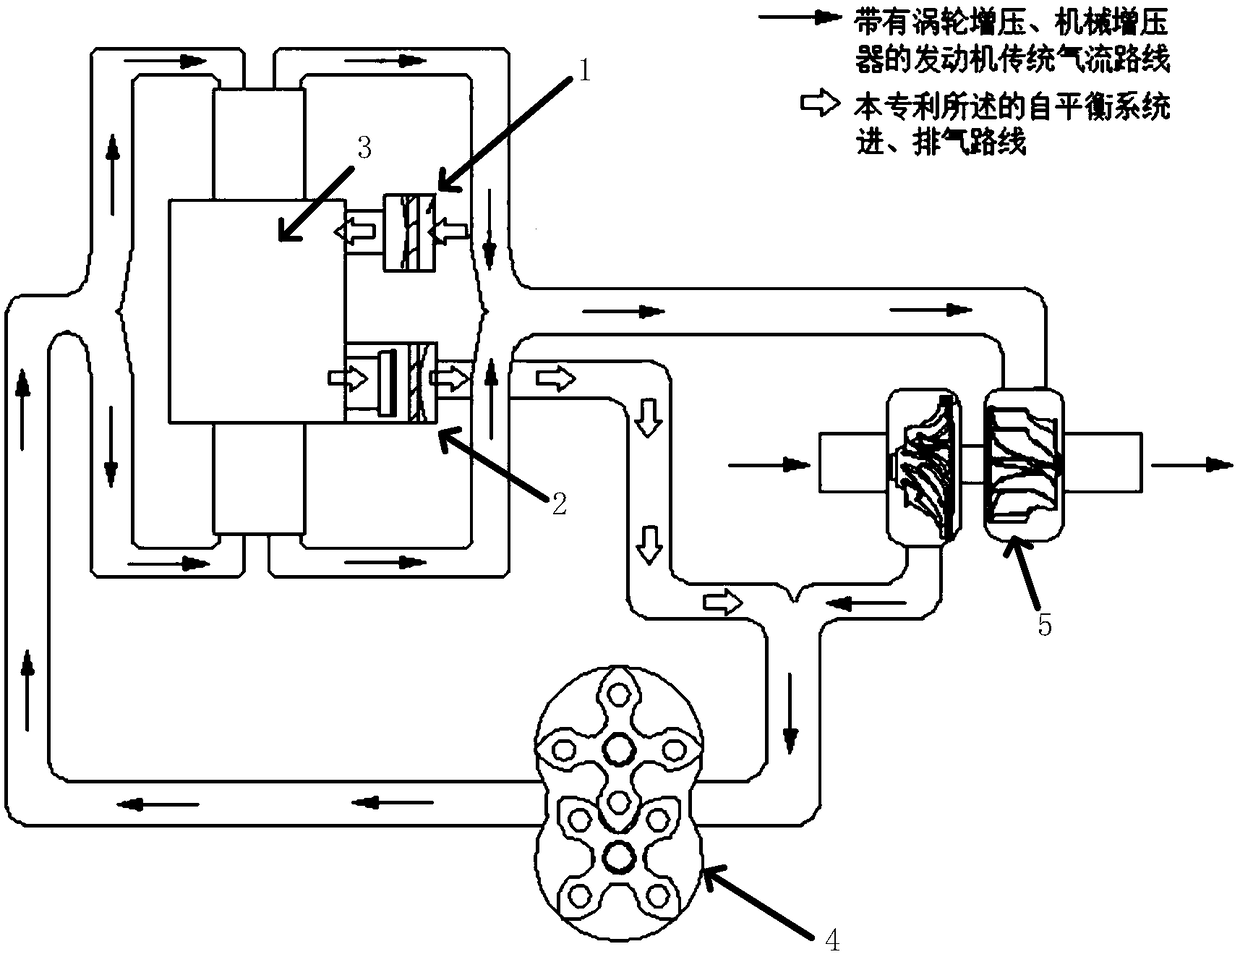 A crankcase pressure self-balancing system for aviation heavy oil piston engine